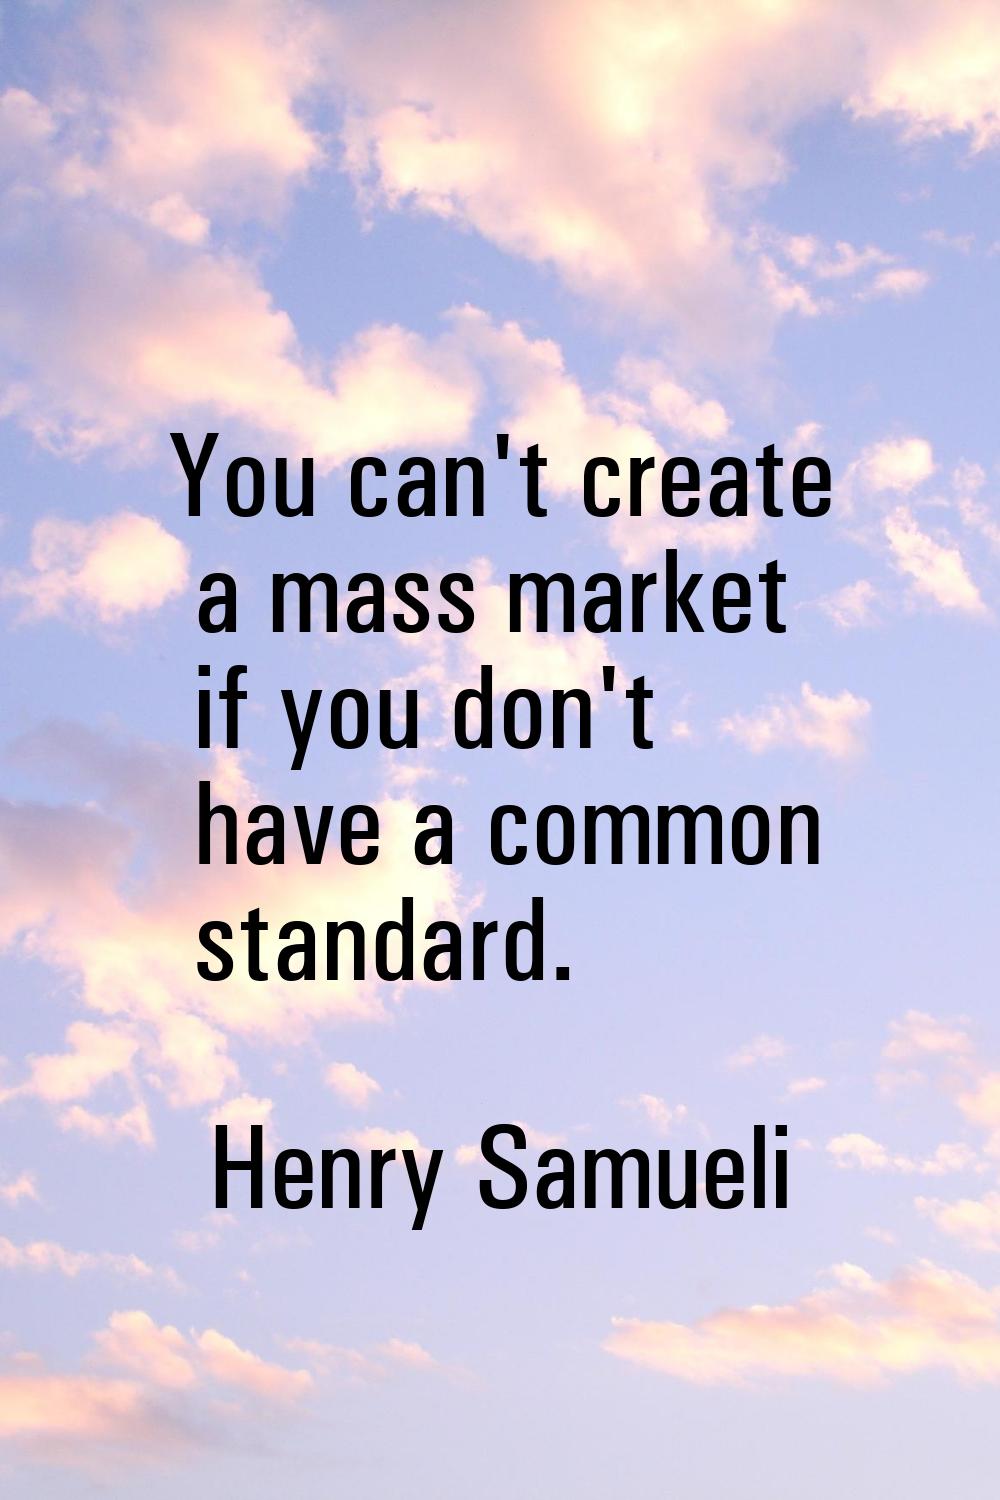 You can't create a mass market if you don't have a common standard.